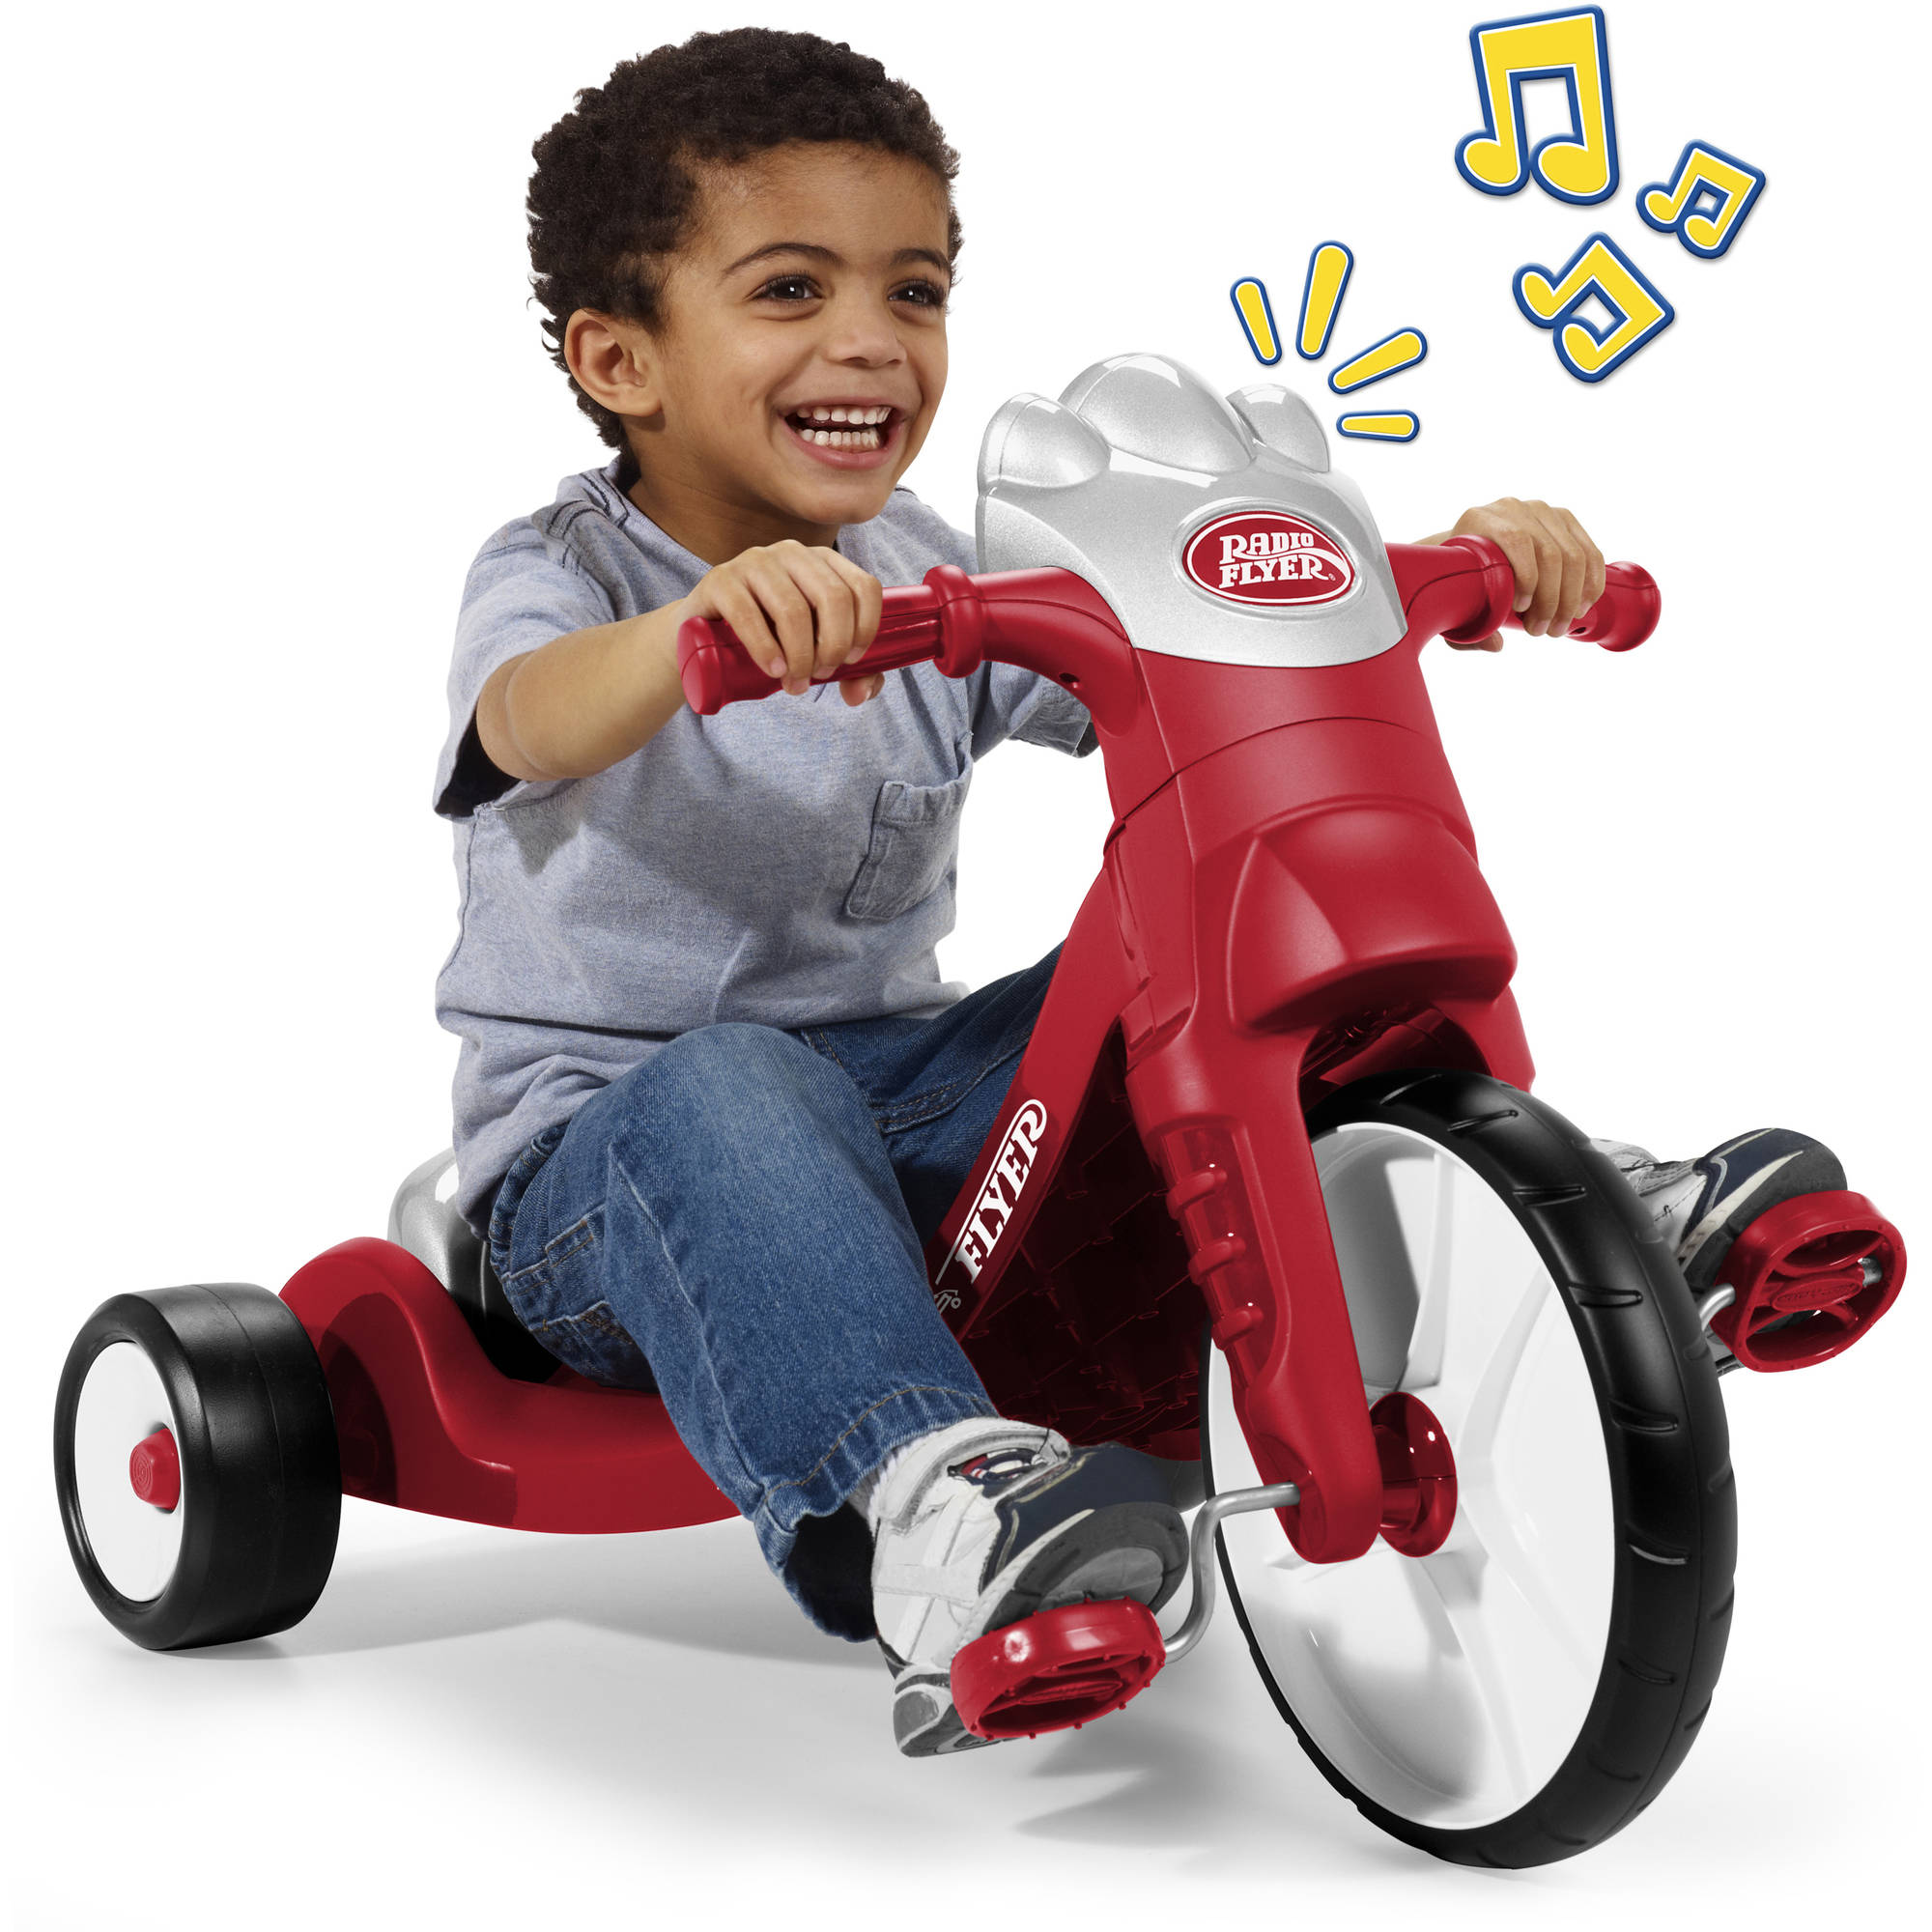 Radio Flyer, Lights & Sounds Racer, Red Tricycle for Girls and Boys - image 1 of 9